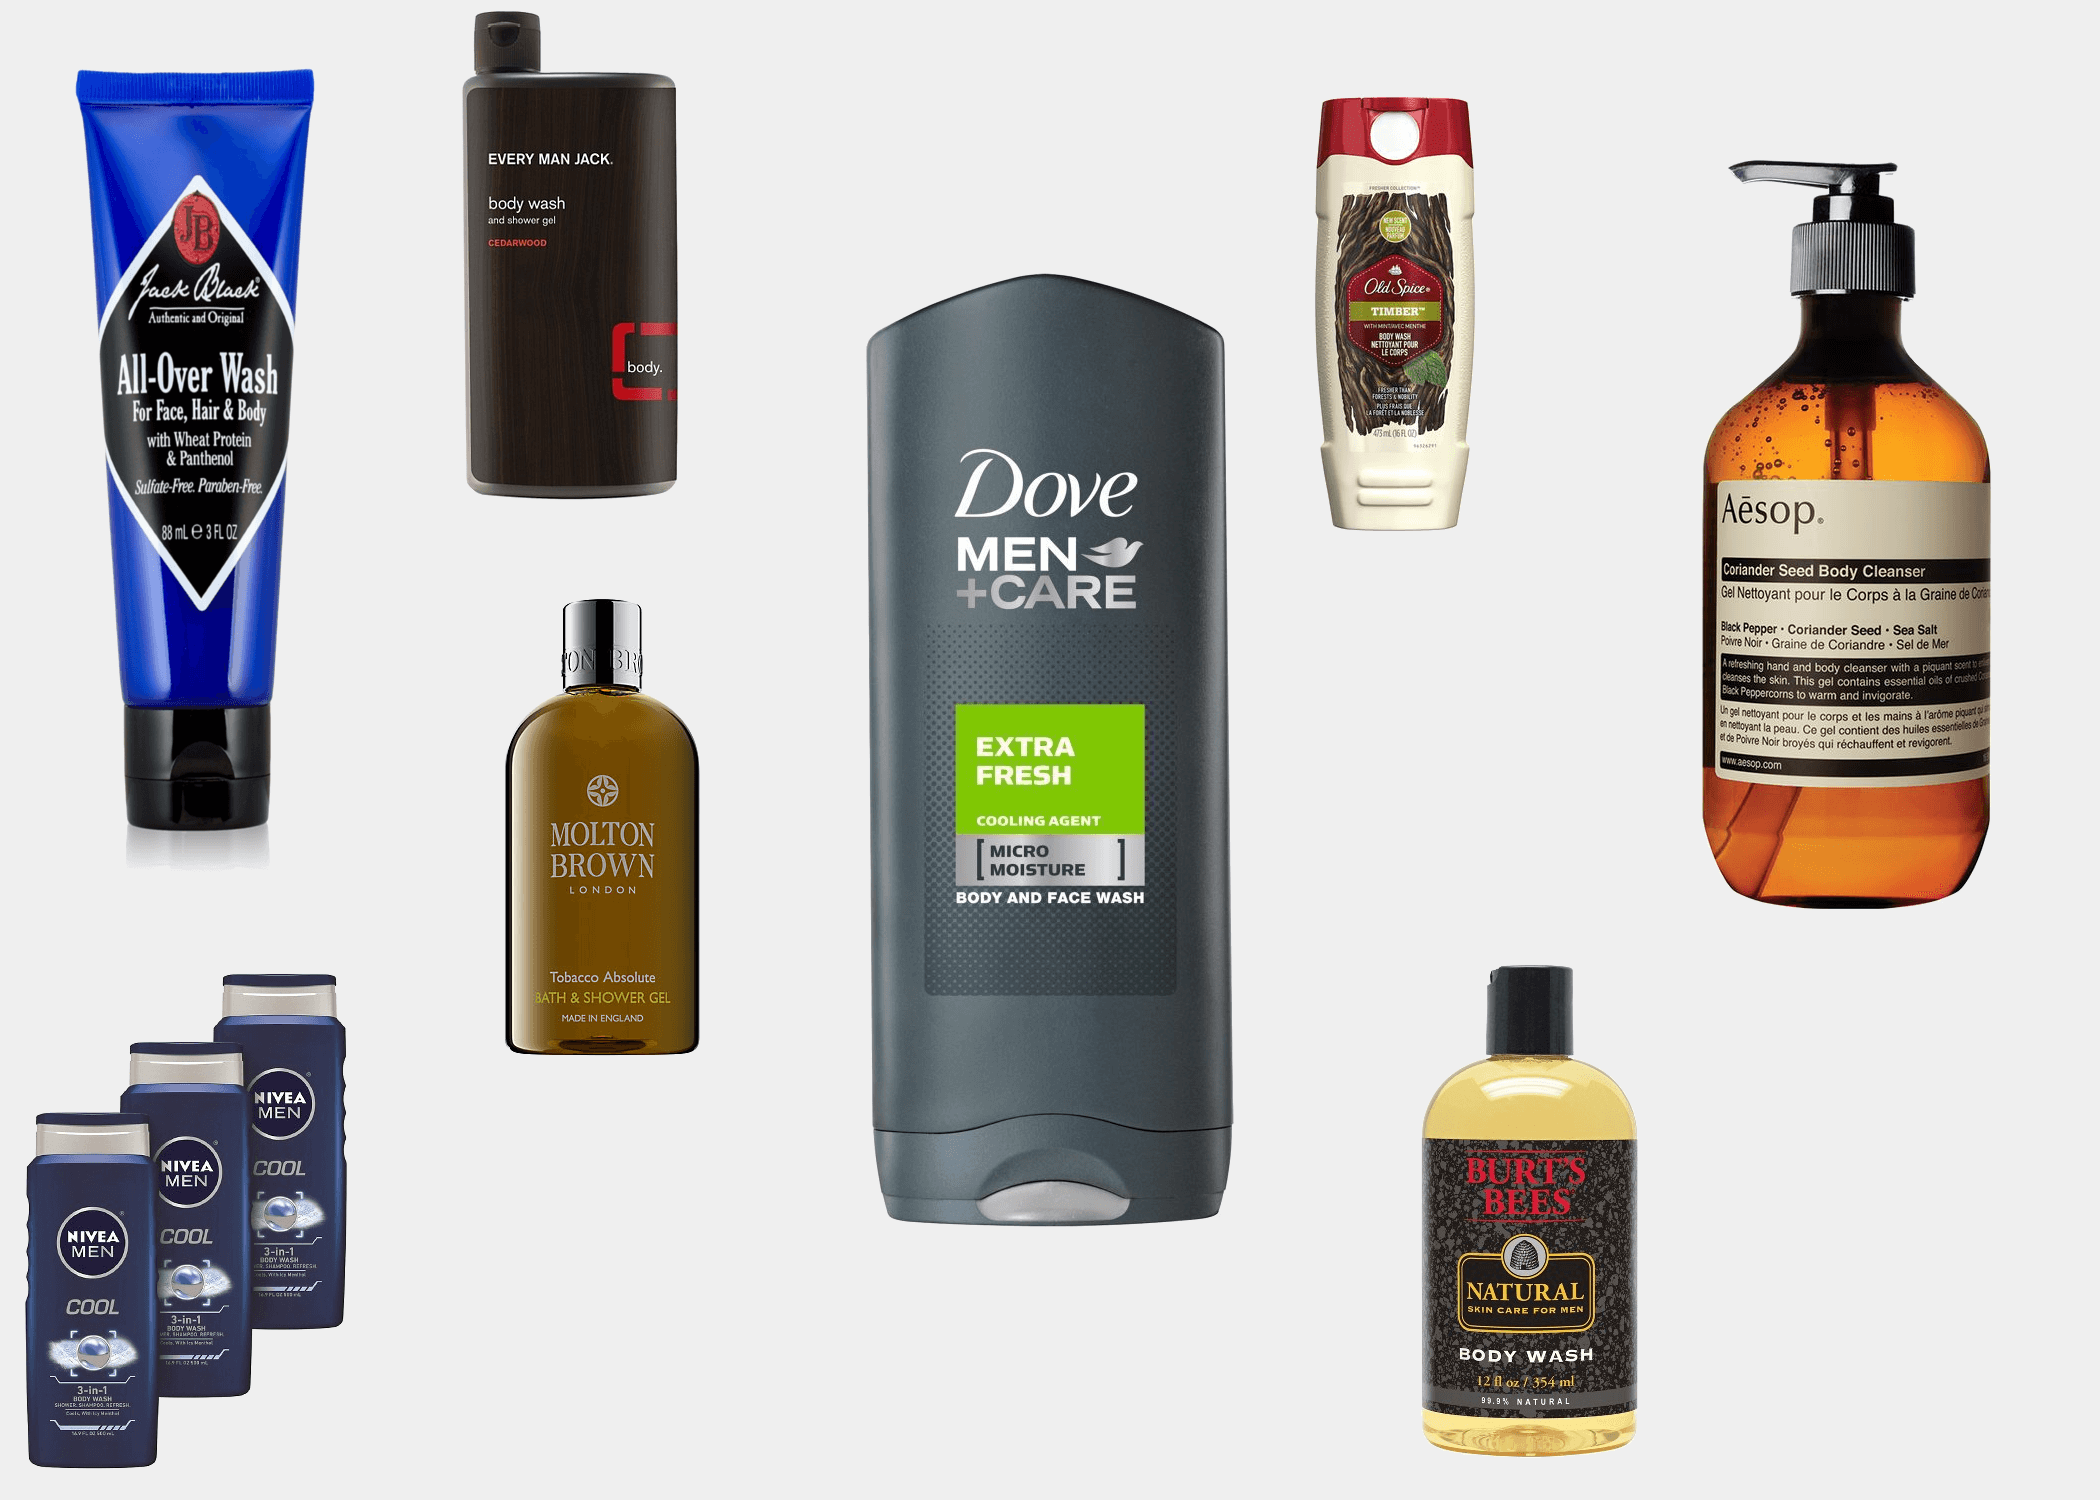 11 Best Antibacterial Body Washes in 2023